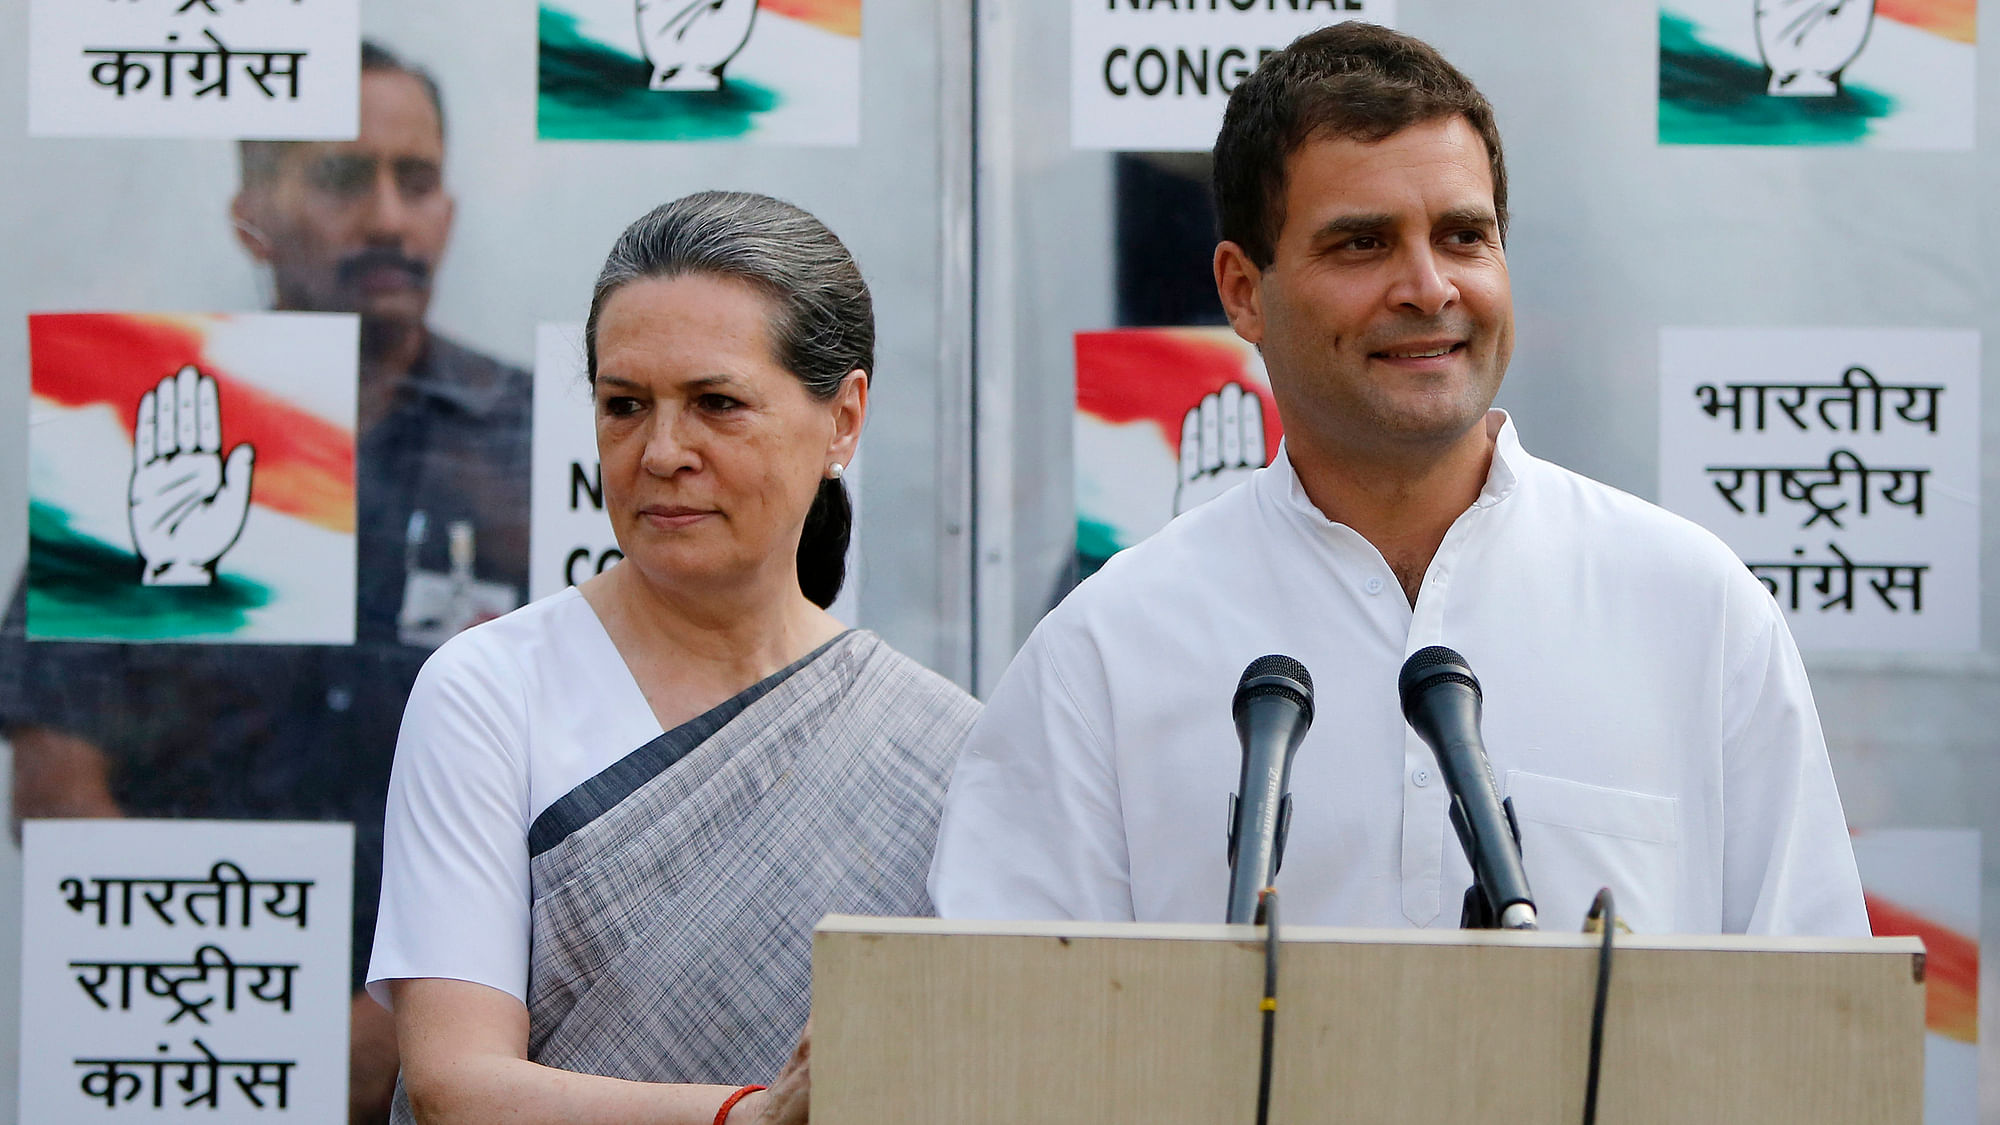 Congress Vice-President Rahul Gandhi speaking to the media in New Delhi as his mother and Congress President Sonia Gandhi (L) stands next to him.&nbsp;